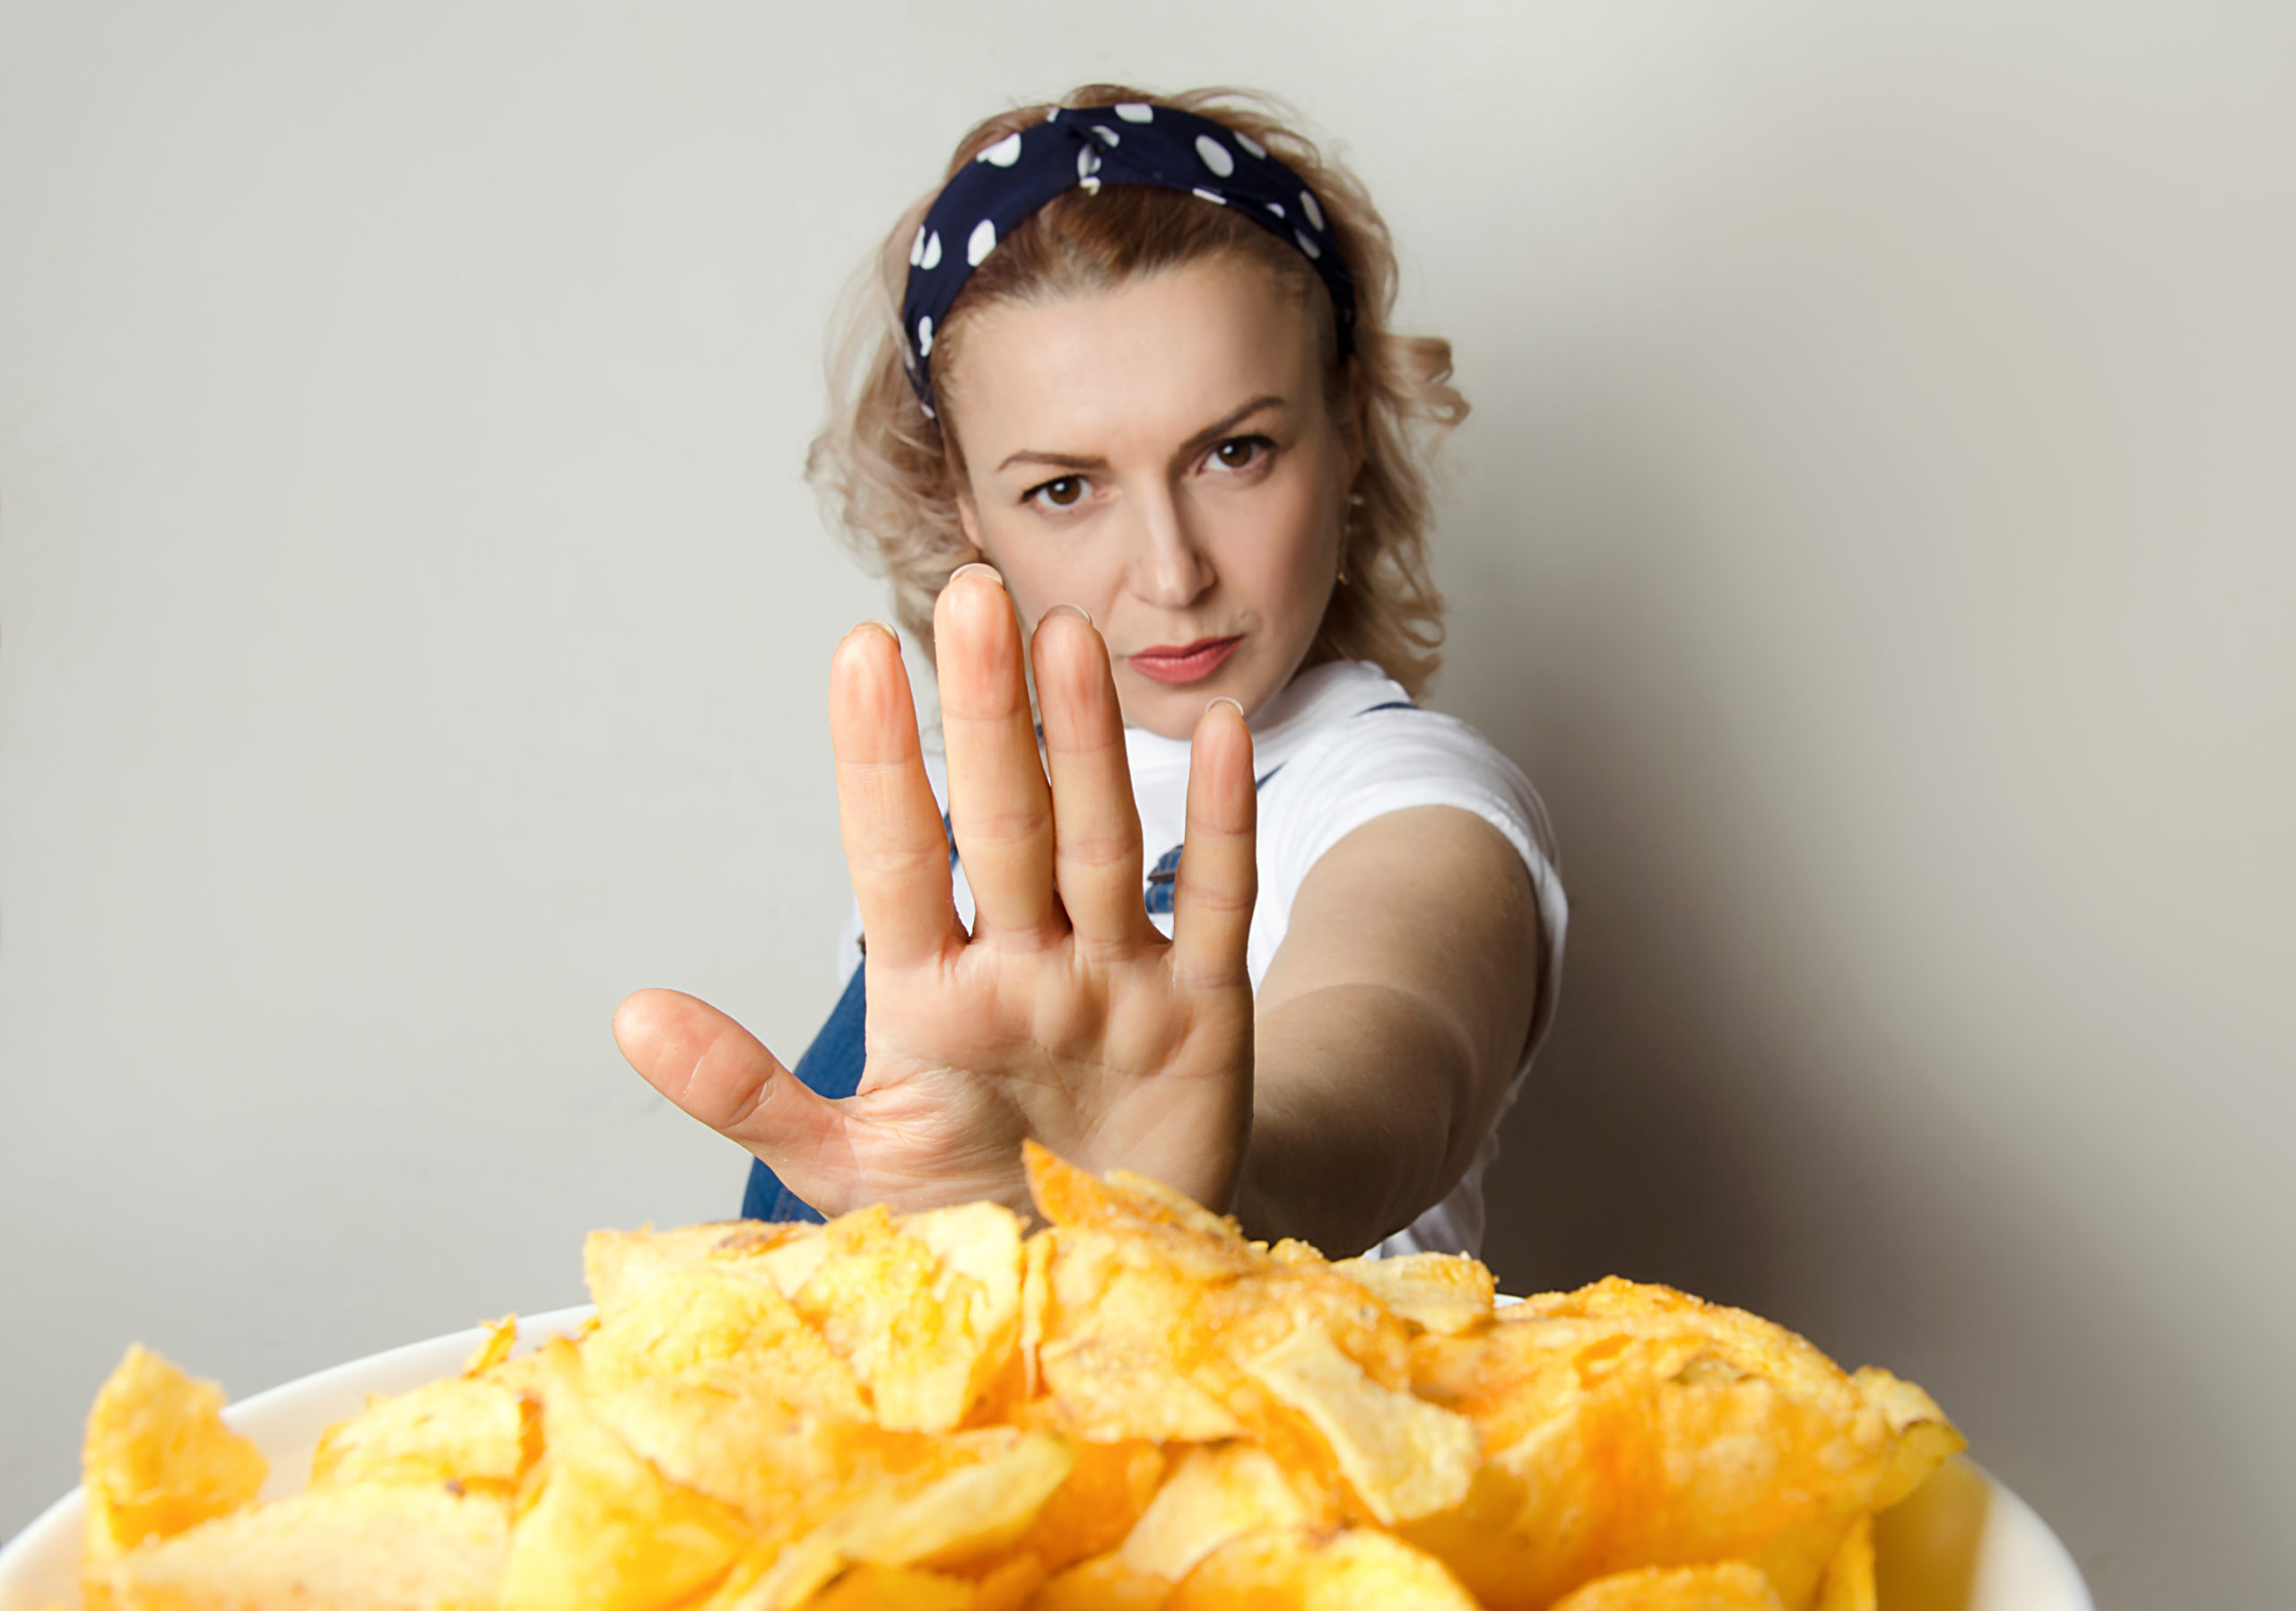 Photograph of a woman holding her hand to say no to junk food used to illustrate, "". Click to learn about getting a customized keto diet plan designed based on your activity level, food preferences, weight goals, and other personal criteria.